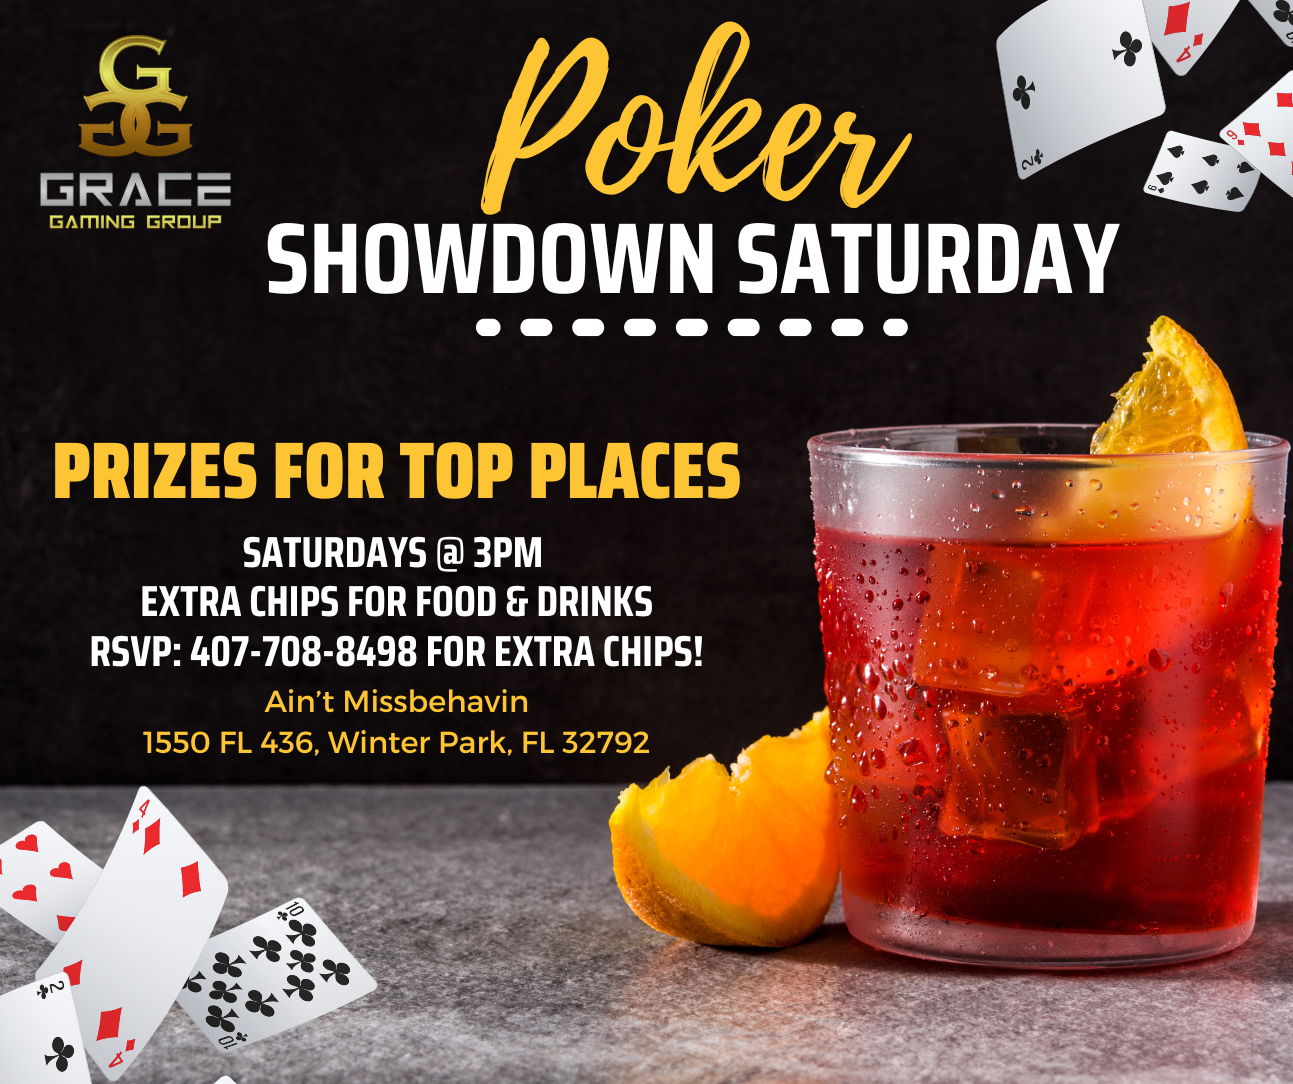 An advertisement for a poker showdown on saturday